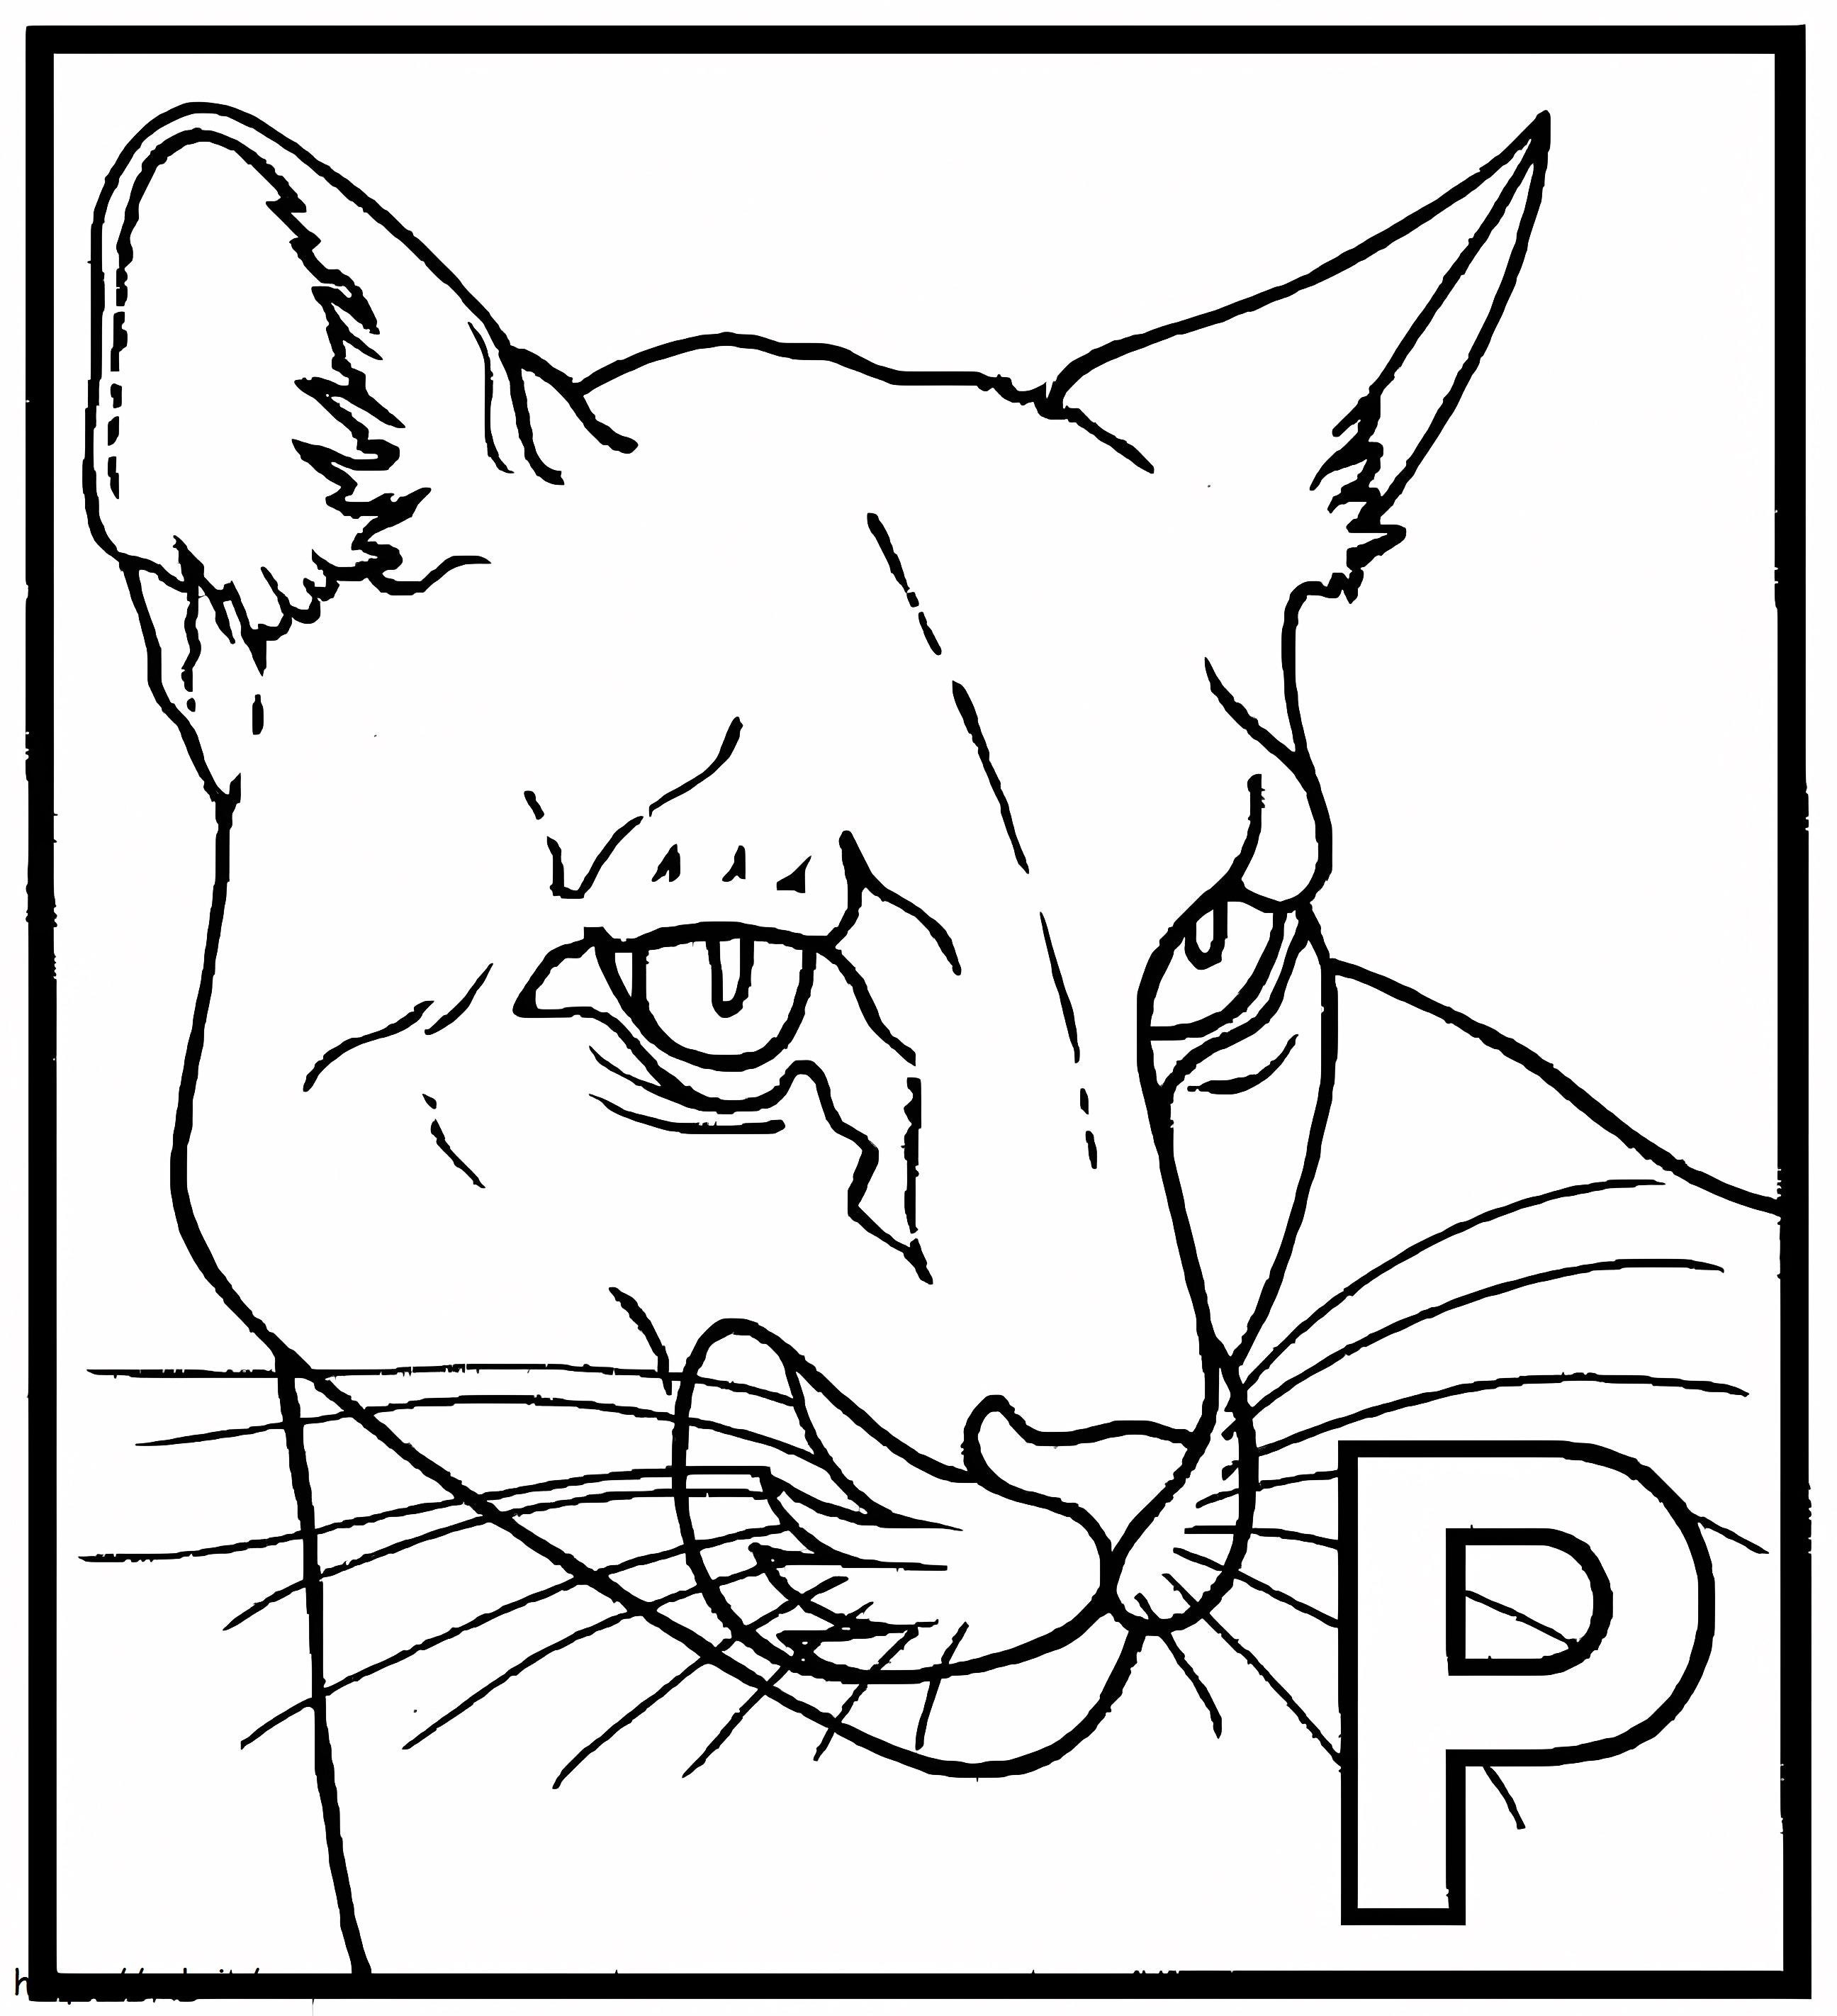 Panther Face With P coloring page